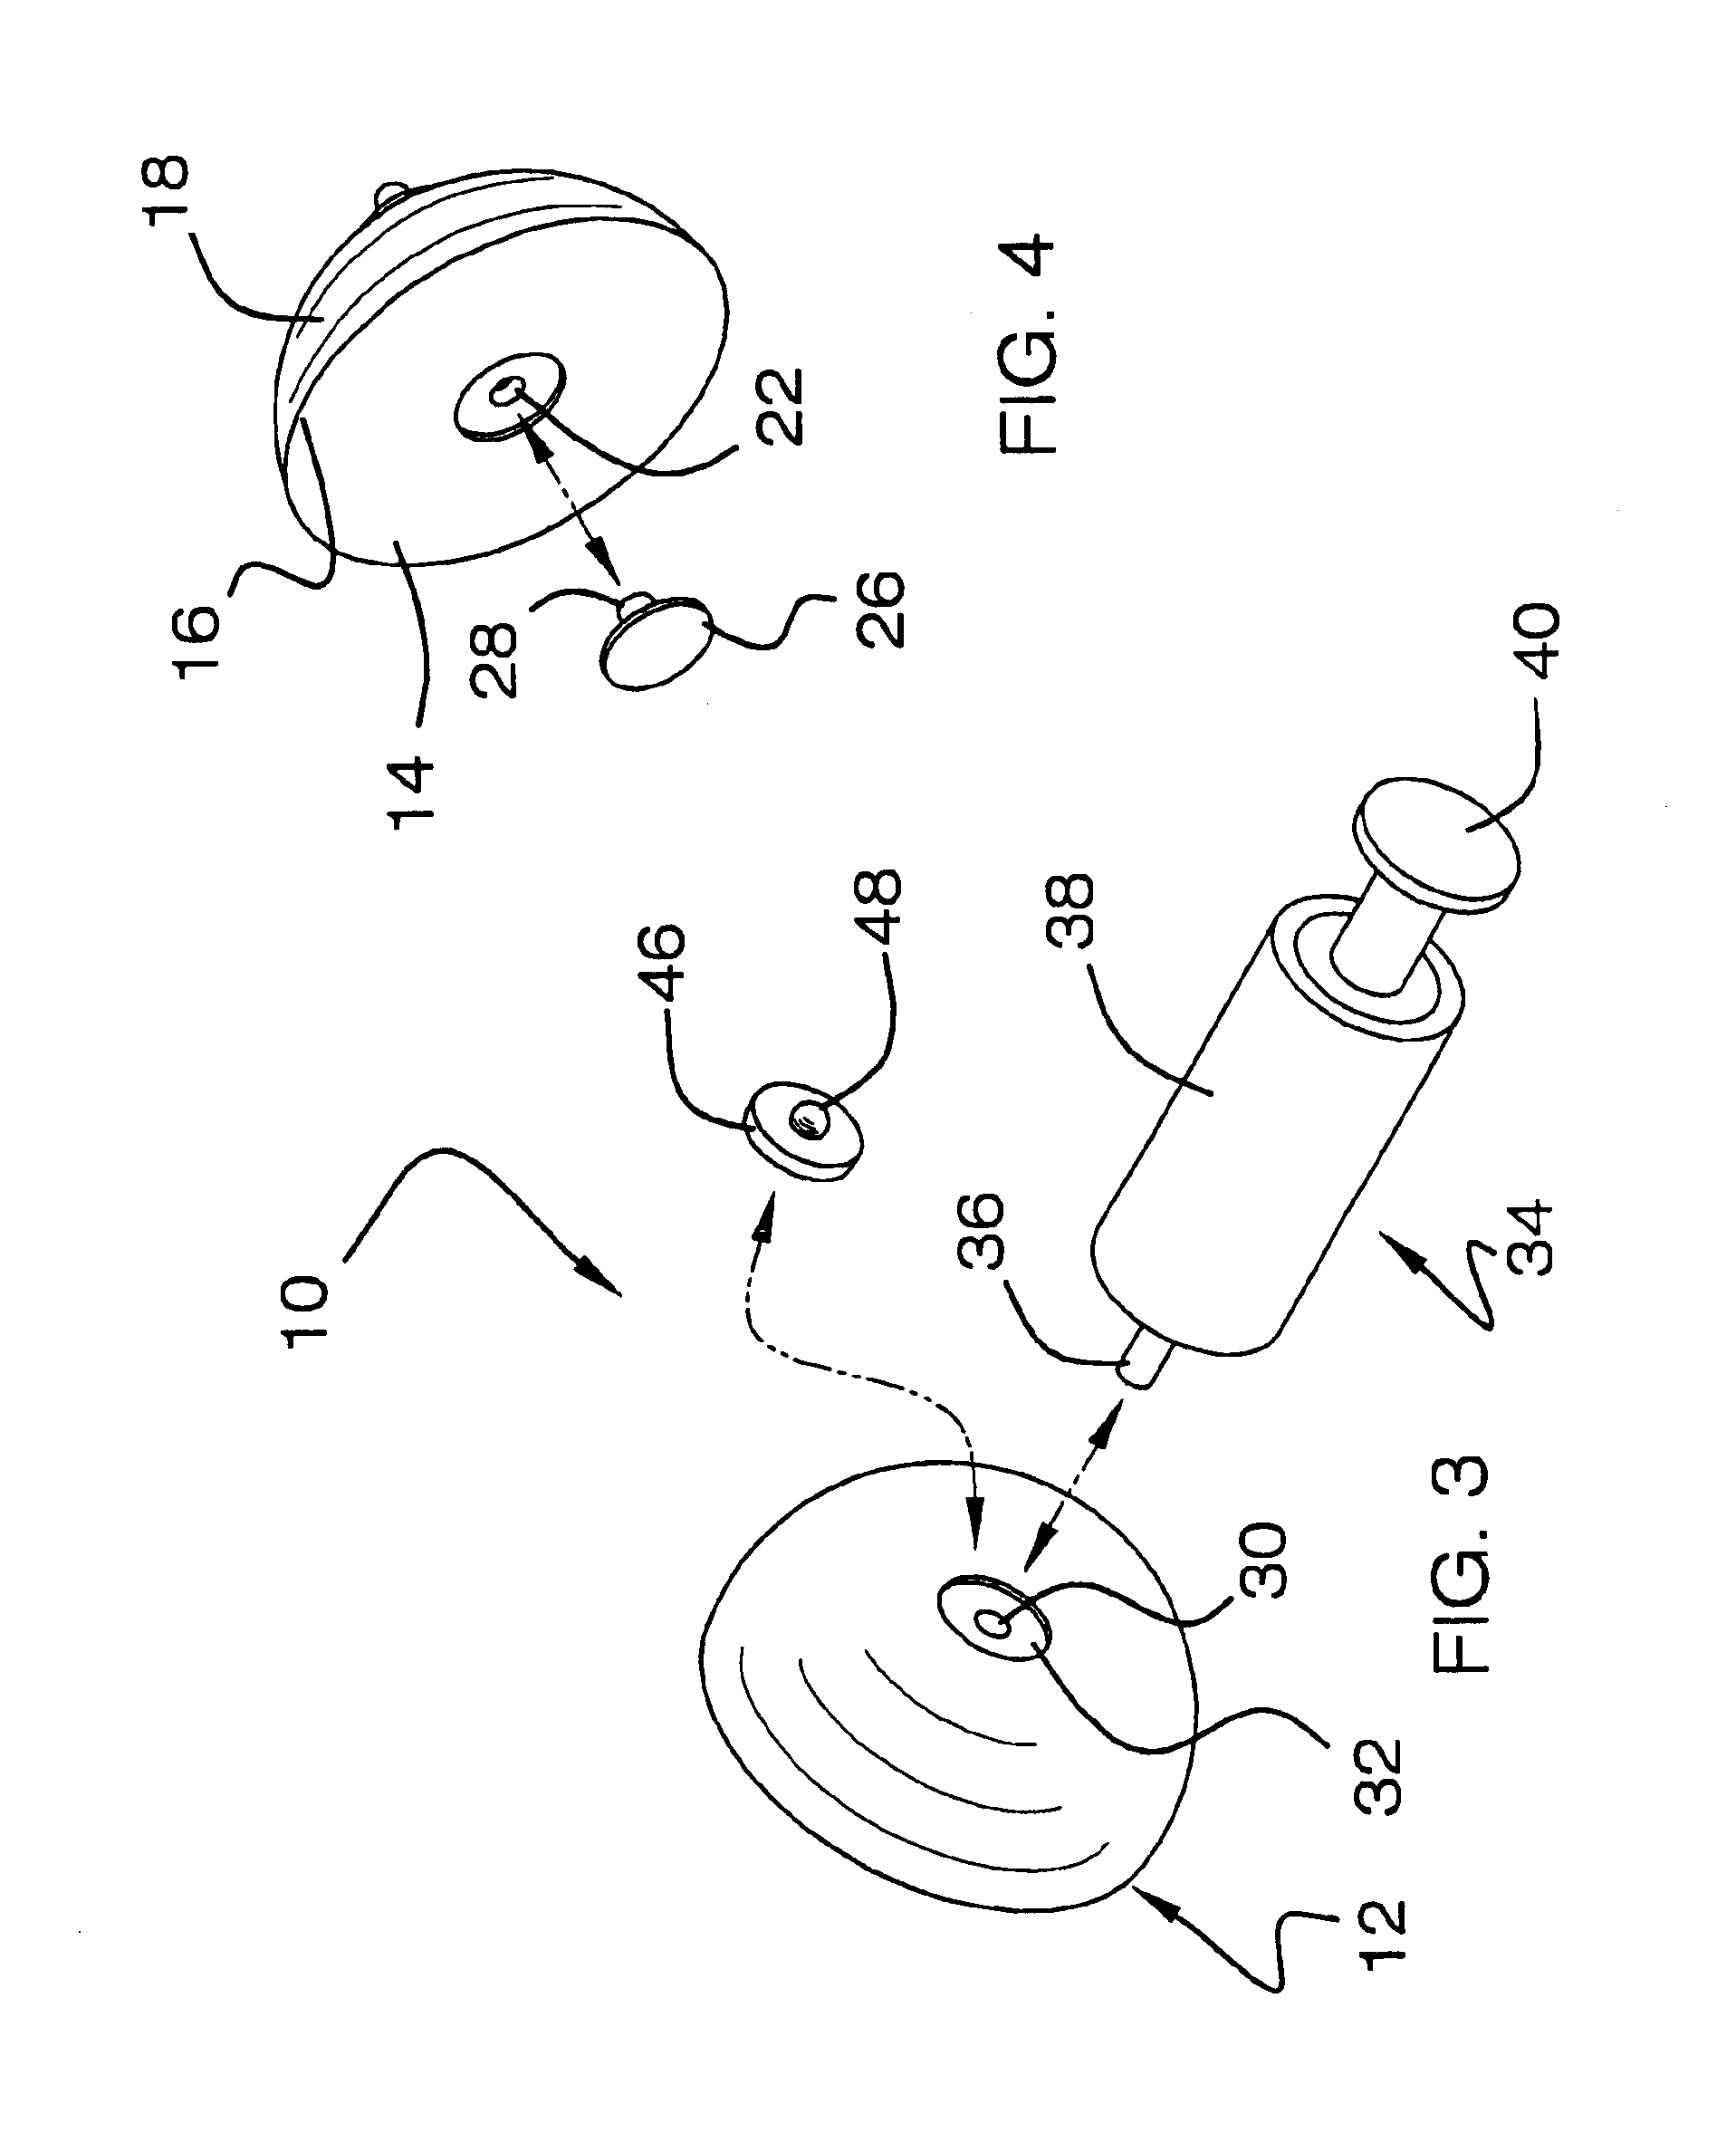 Inflatable prosthetic device